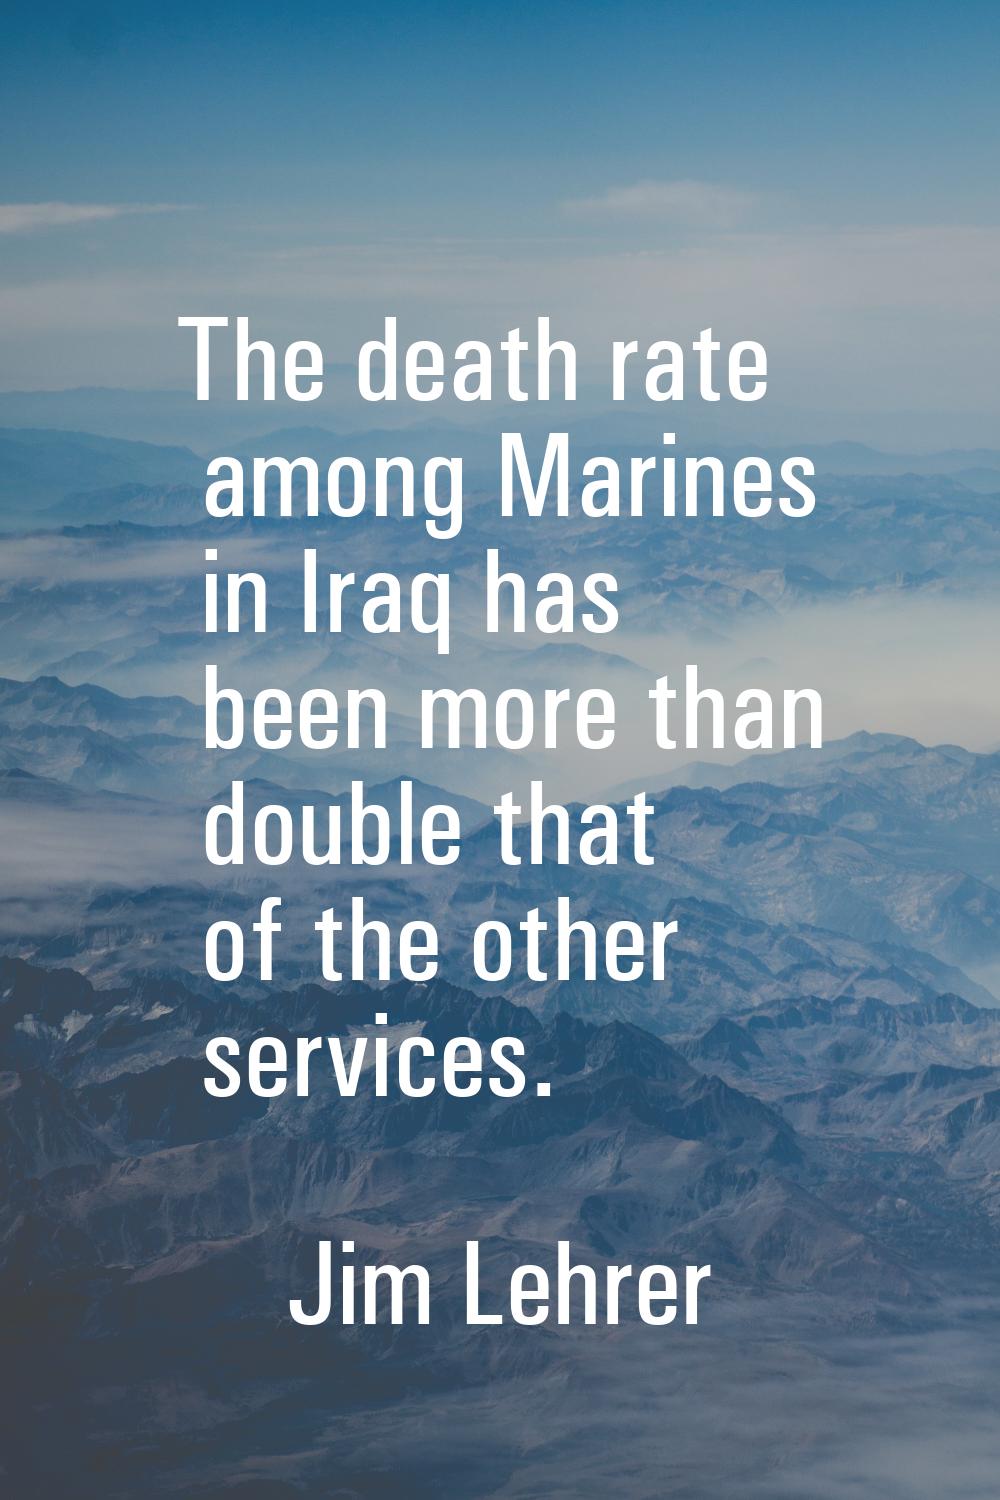 The death rate among Marines in Iraq has been more than double that of the other services.